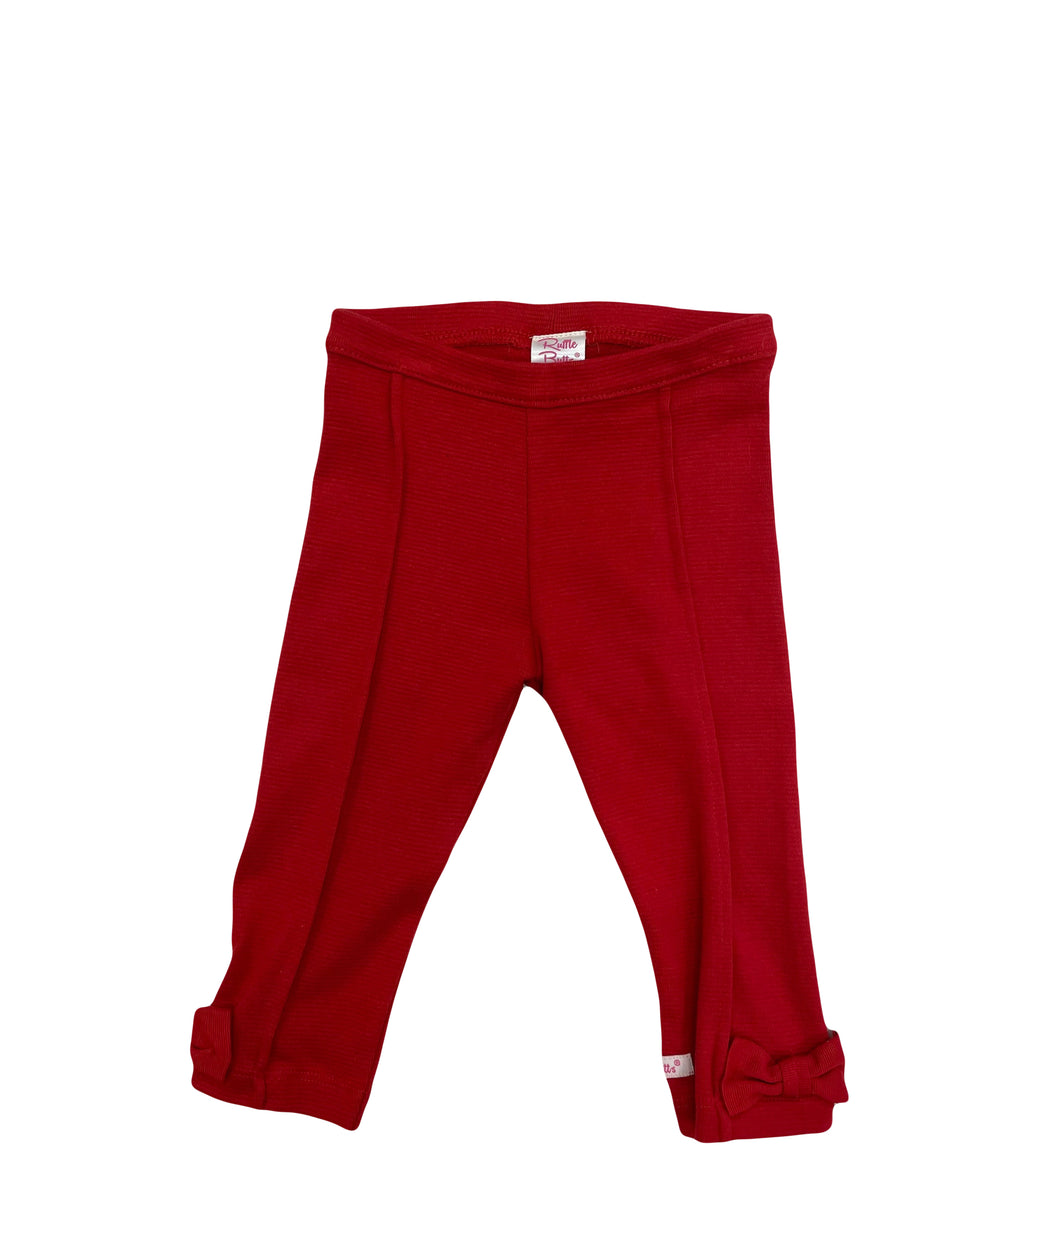 Red pleated legging pants adorned with bows on the ankle. Made by Ruffle Butts.